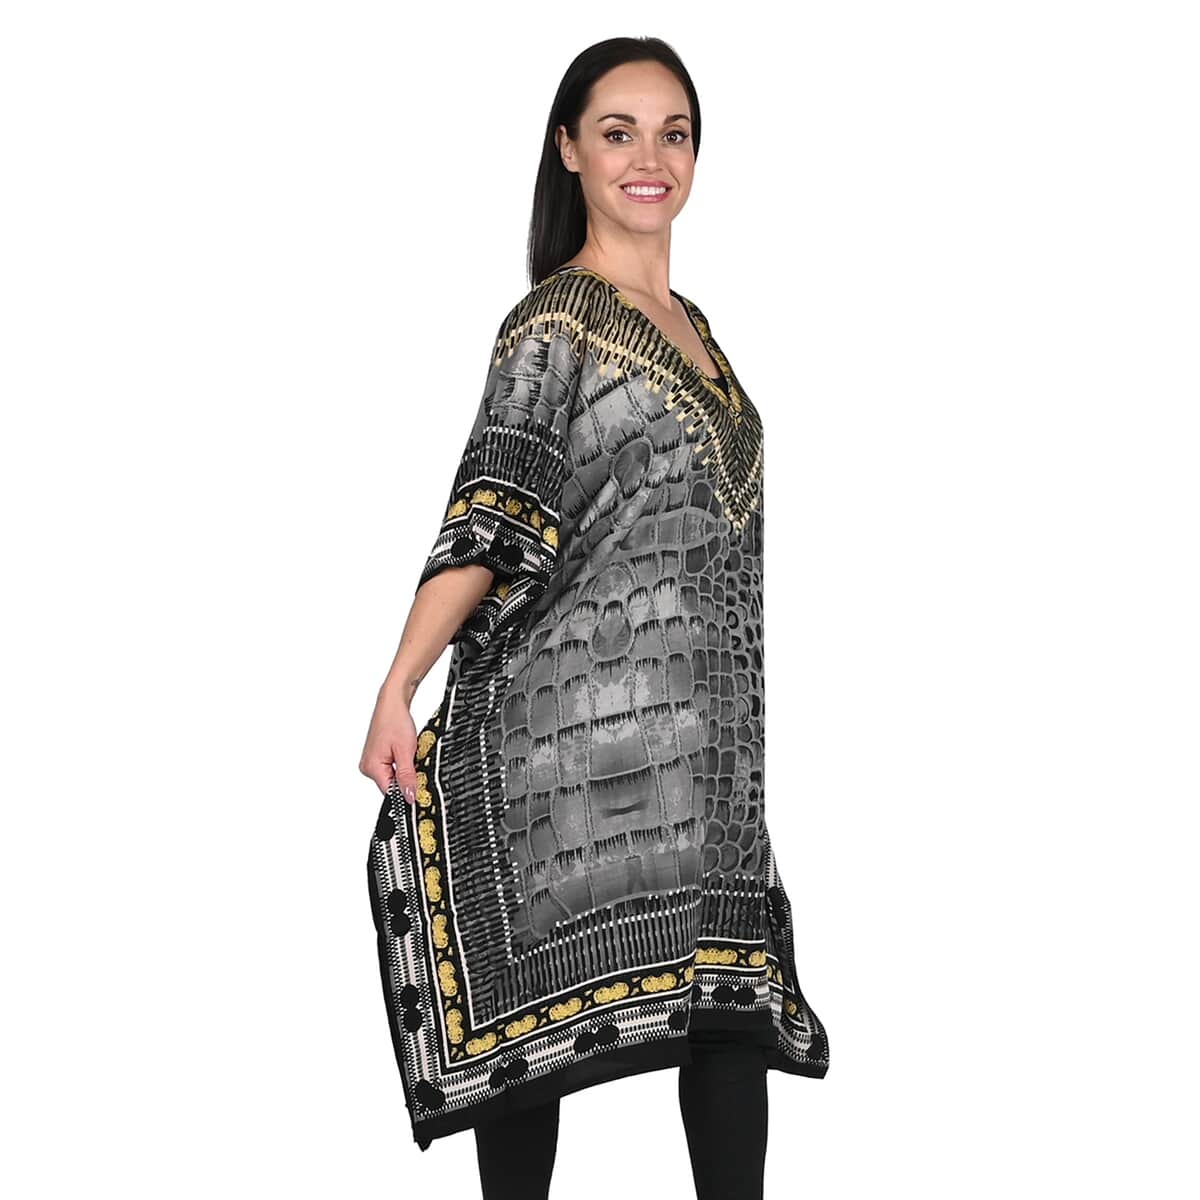 PICK OF THE SHOW JOVIE Grey Reptile/Leopard V-Neck Kaftan - One Size Fits Most image number 2